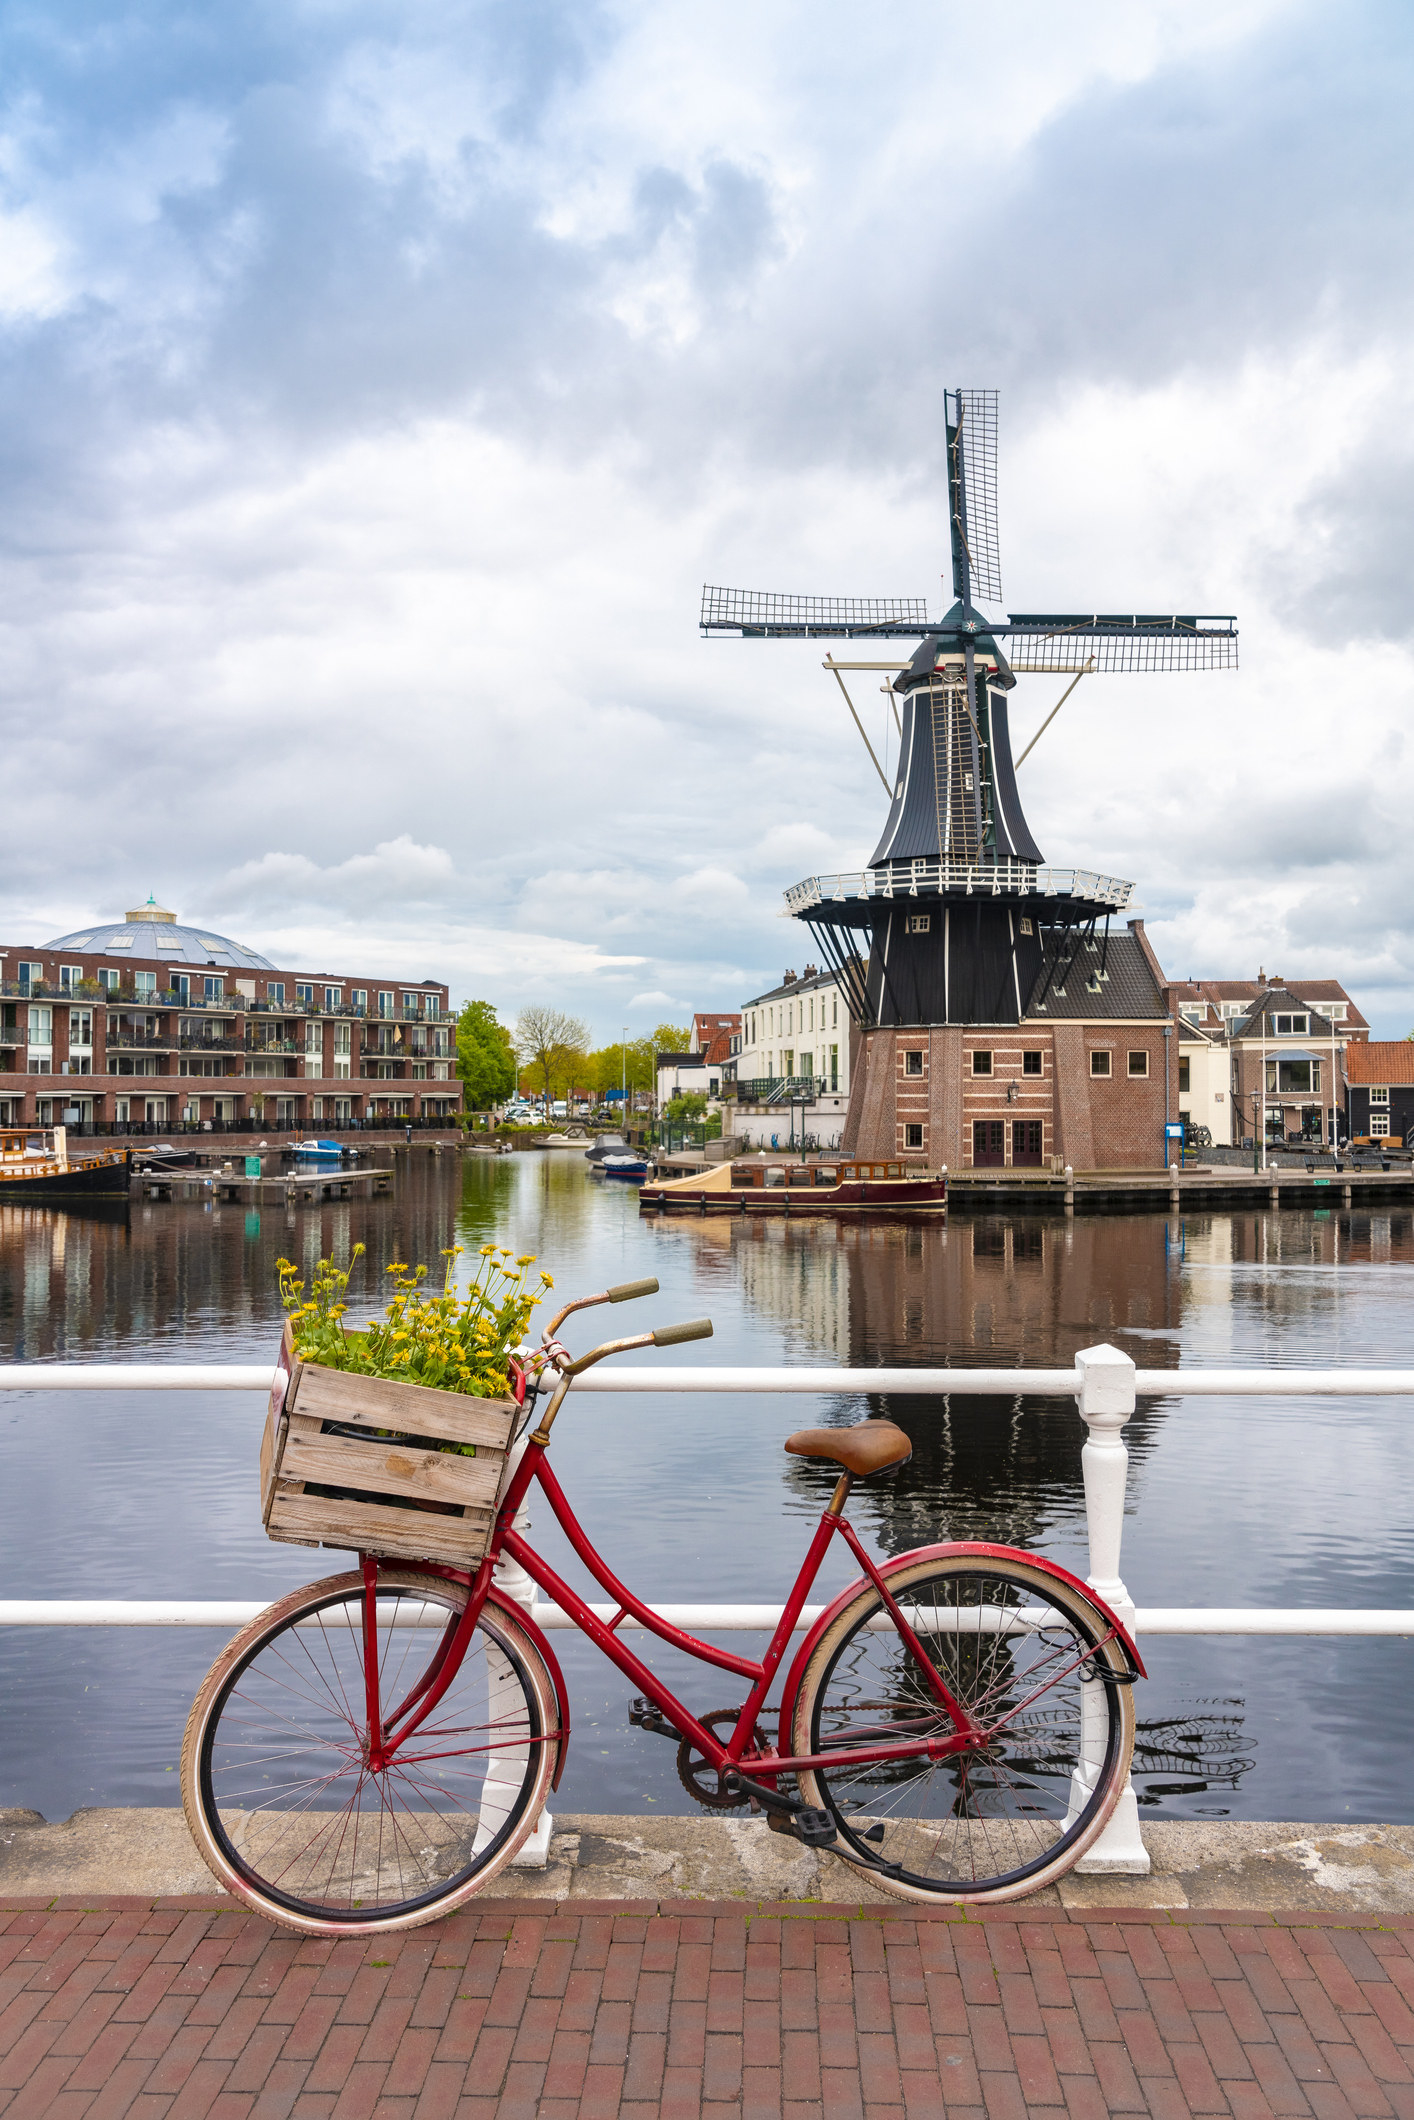 A bicycle by a canal with windmill in the background.